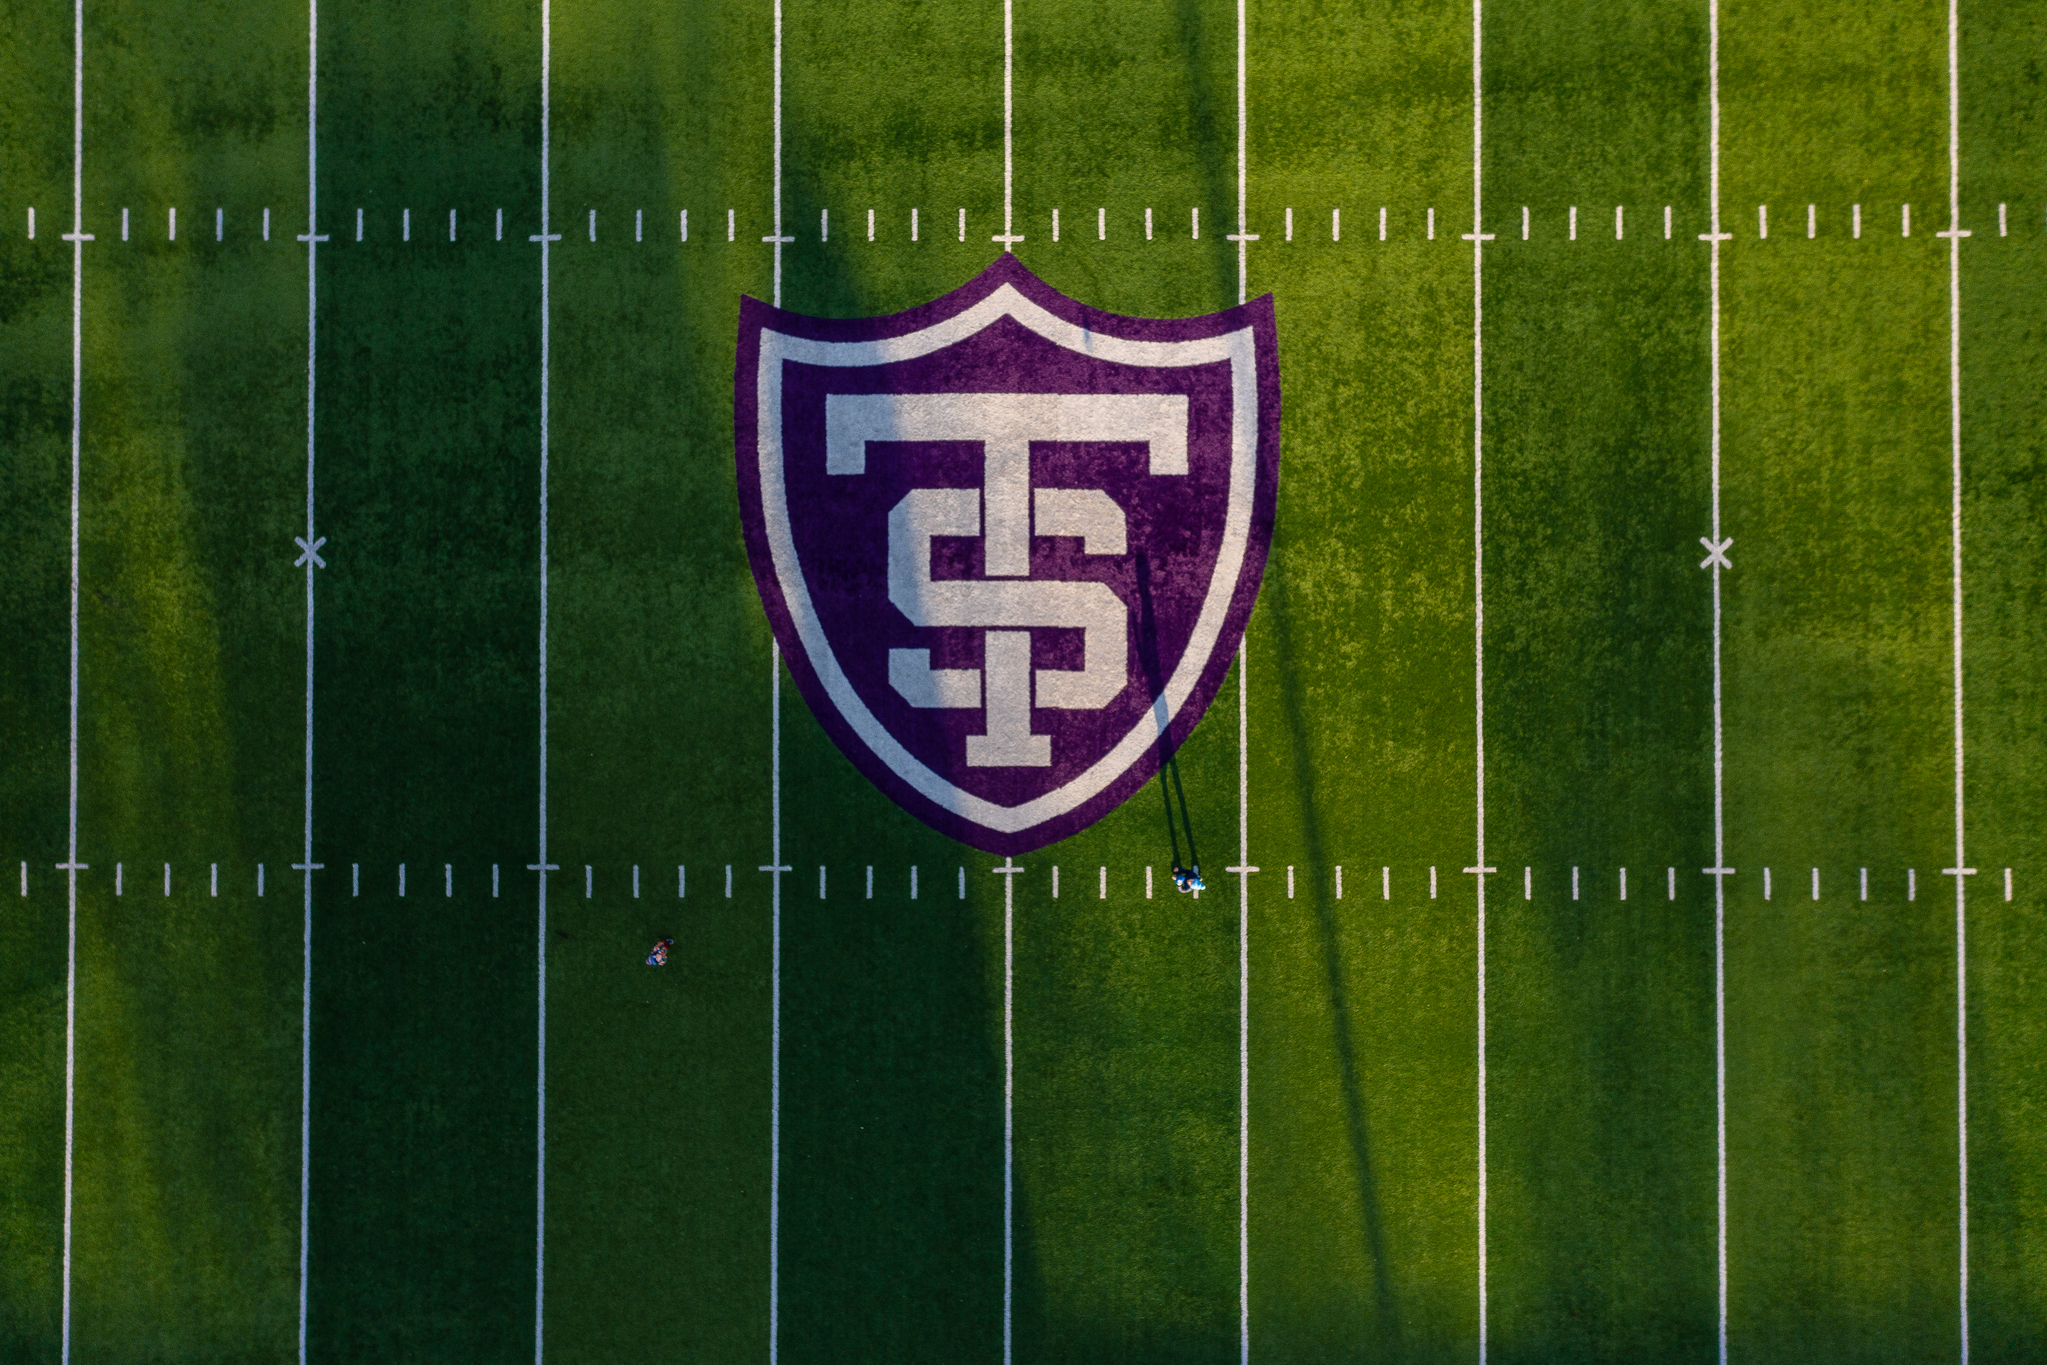 aerial photo of the st. thomas logo at the 50 yard line of O'Shaughnessy Stadium